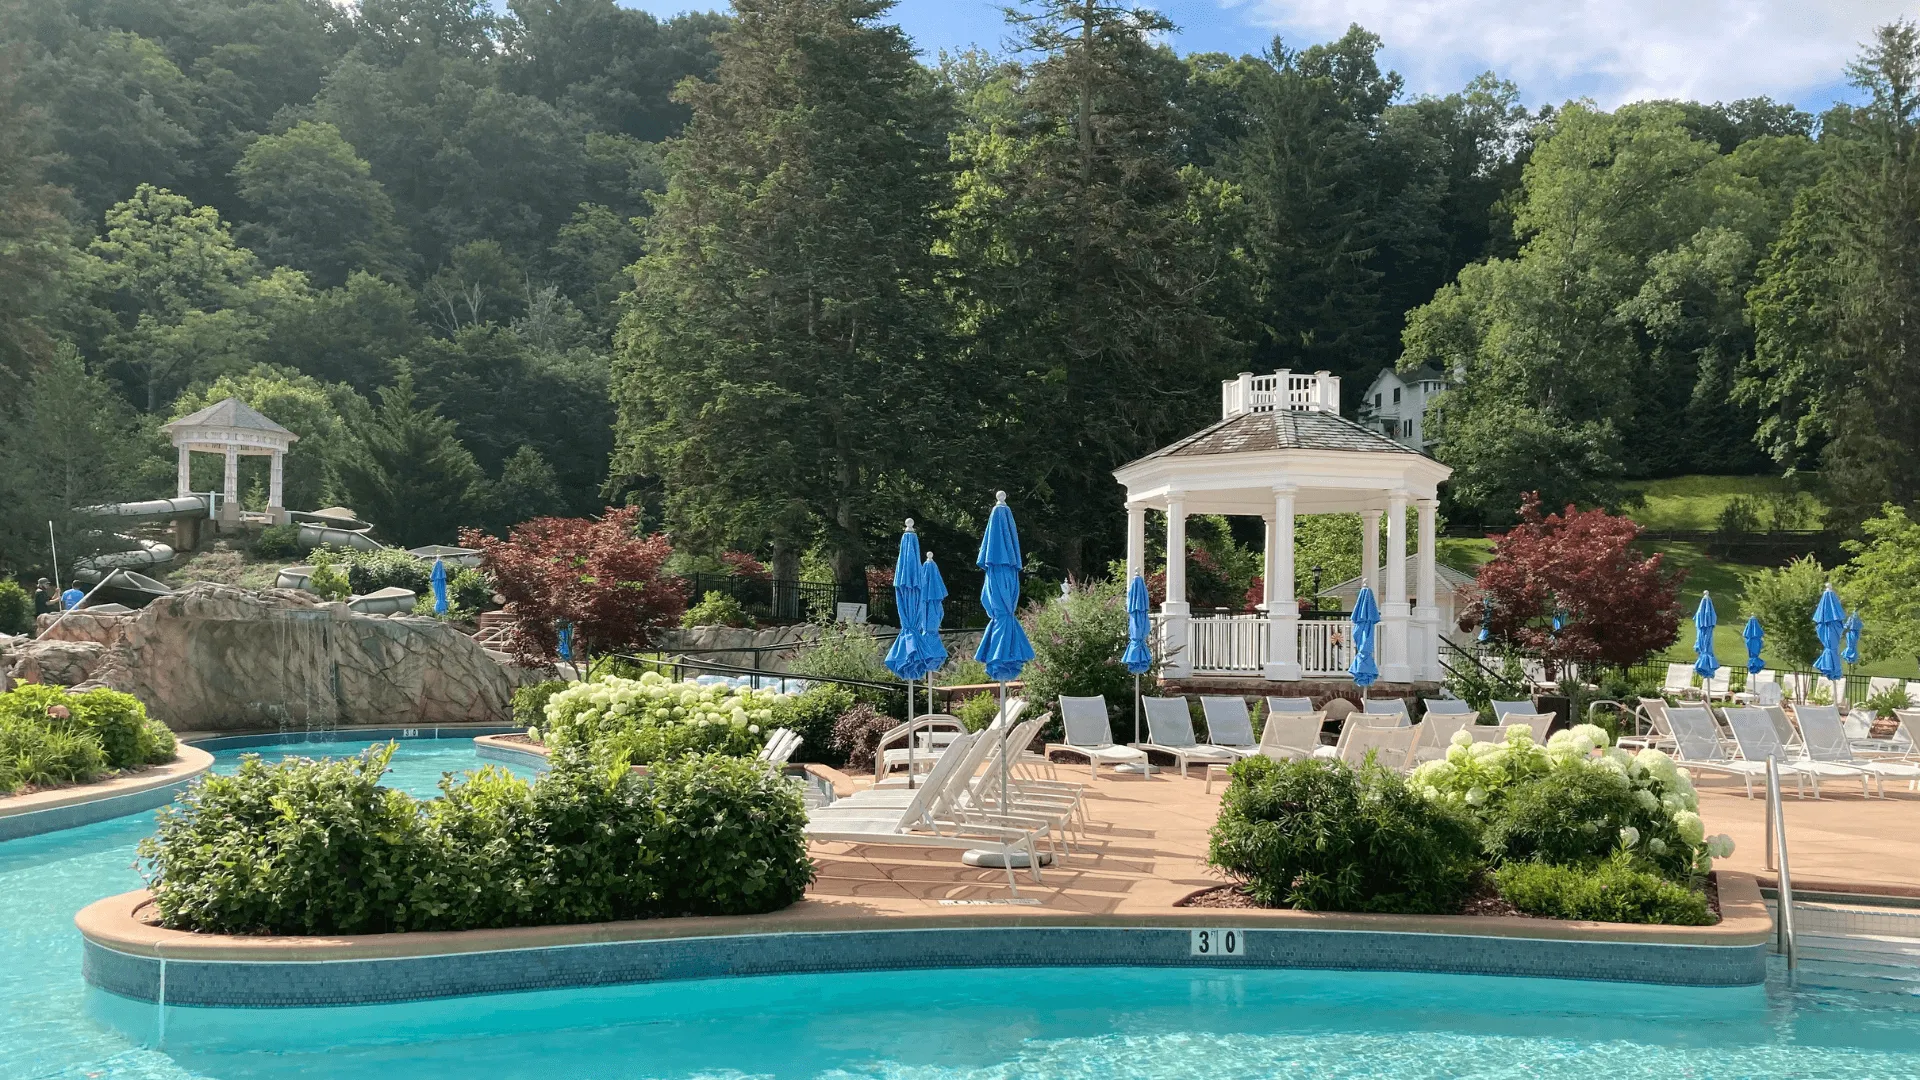 The newly renovated pools at The Omni Homestead in Hot Springs, Virginia.